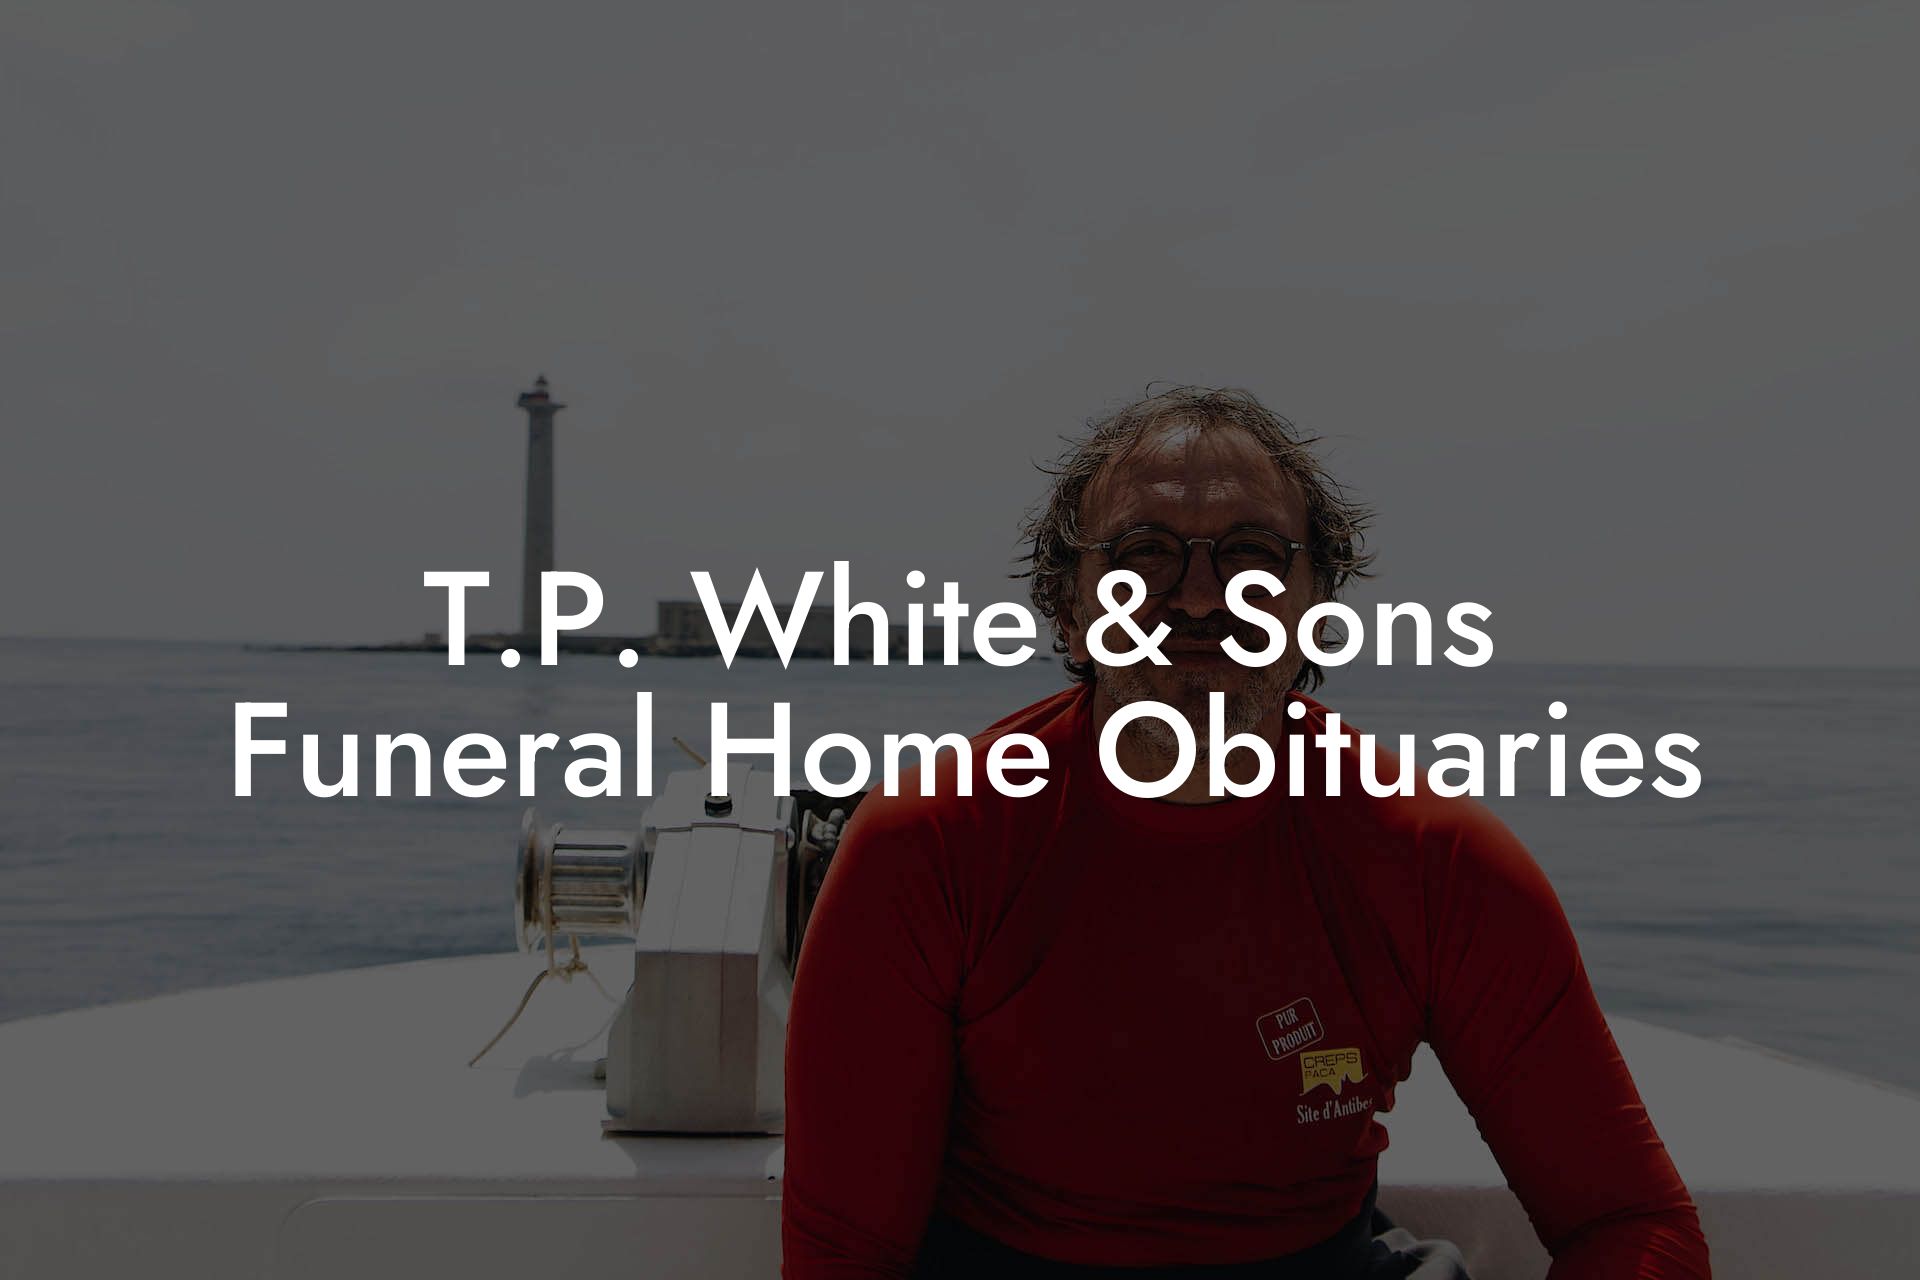 T.P. White & Sons Funeral Home Obituaries